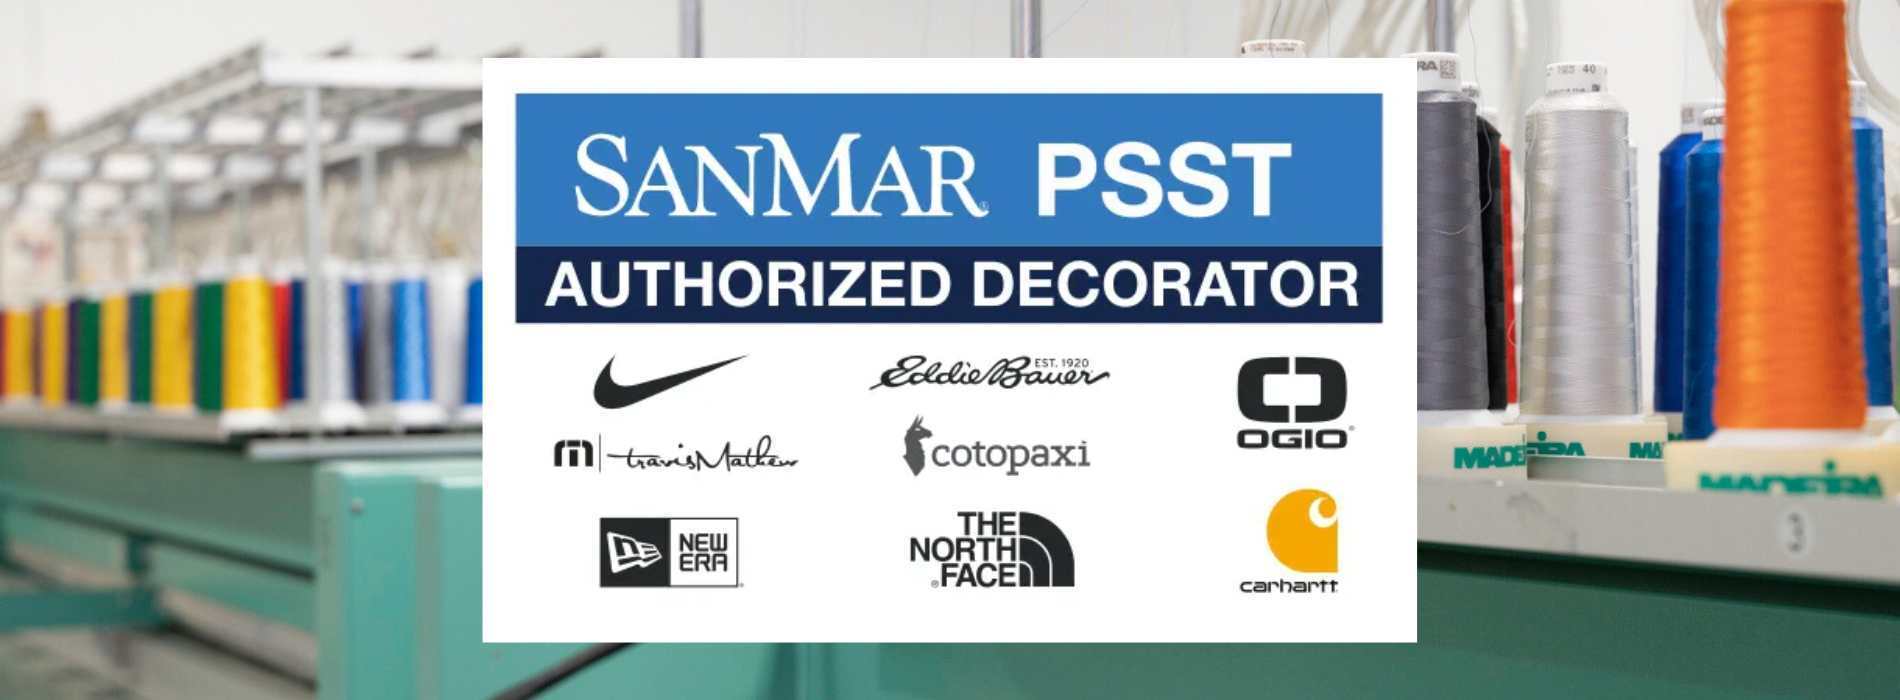 Authorized Decorator Emblem, displaying the brand names Sanmar PSST, Nike, Eddie Bauer, Ogio, Travis Mathew, Cotopaxi, New Era, The North Face, and Carhartt